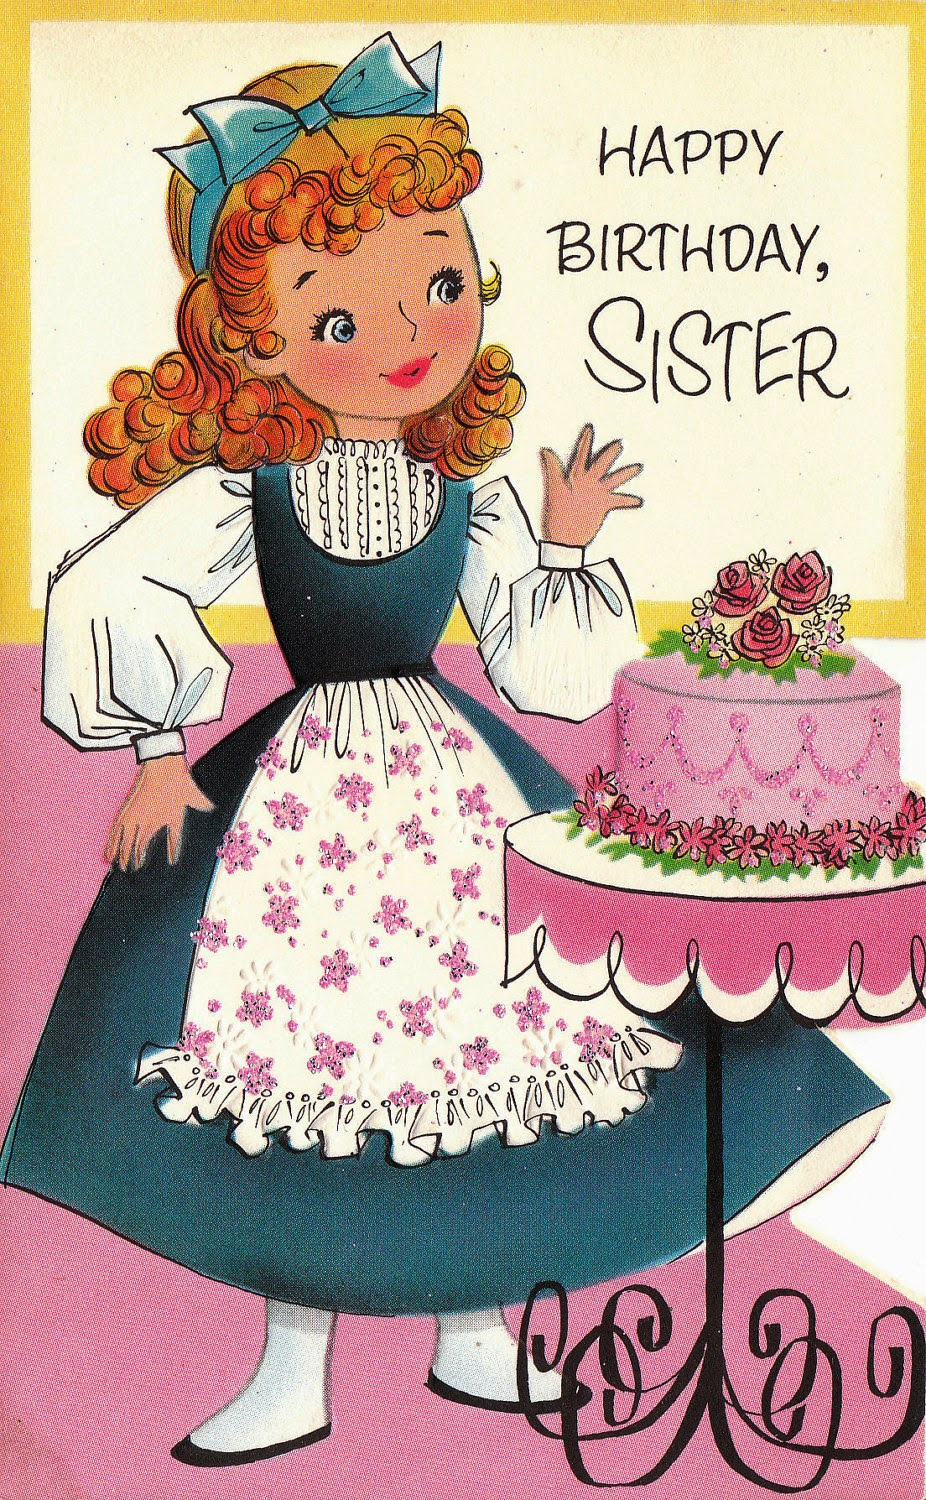 Happy Birthday Wishes To Sister
 Happy birthday wishes cards images for sister Greetings